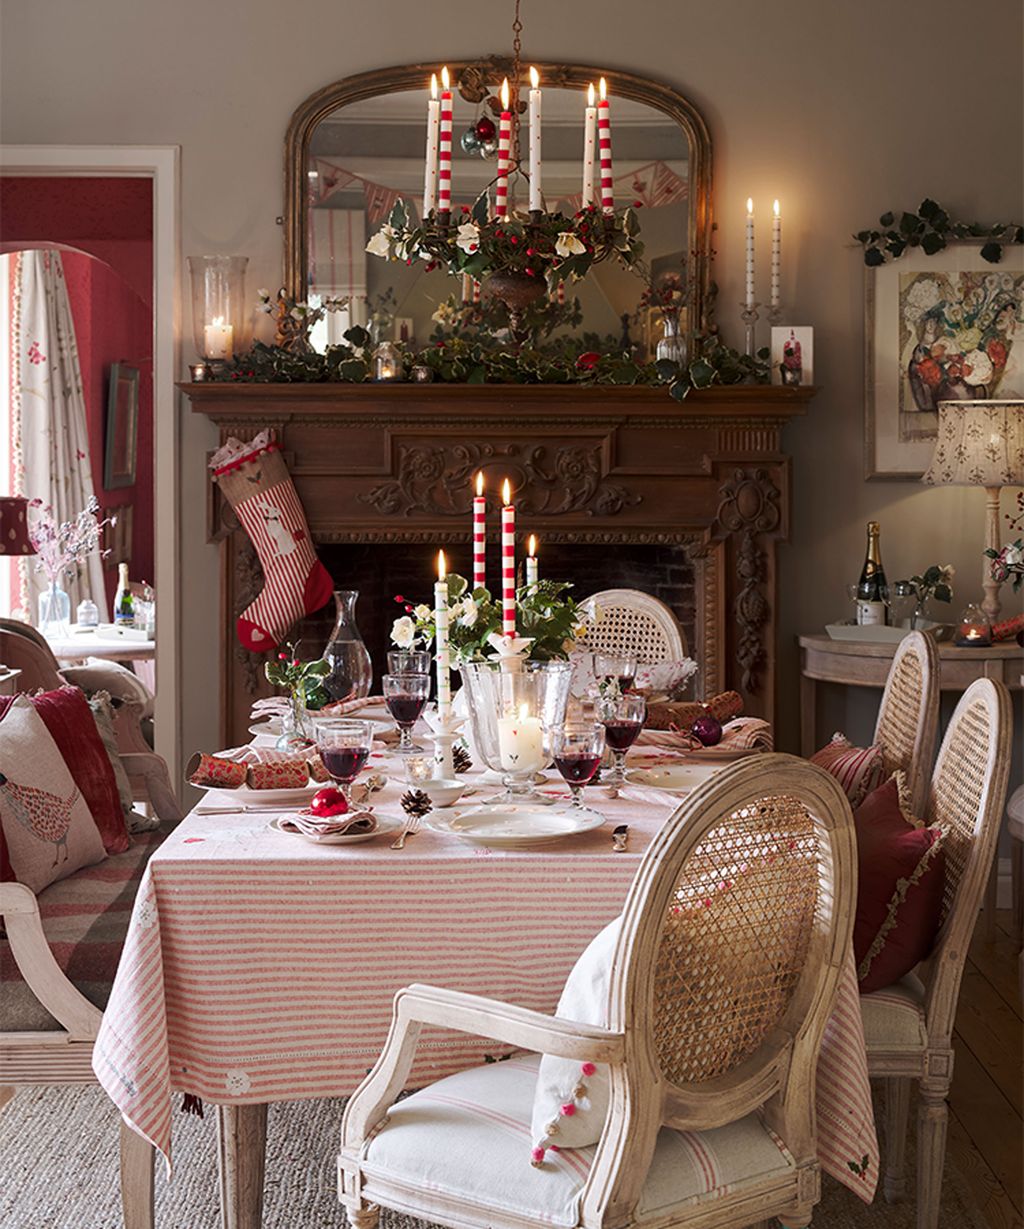 Christmas table centerpieces: 12 festive focal points | Homes & Gardens